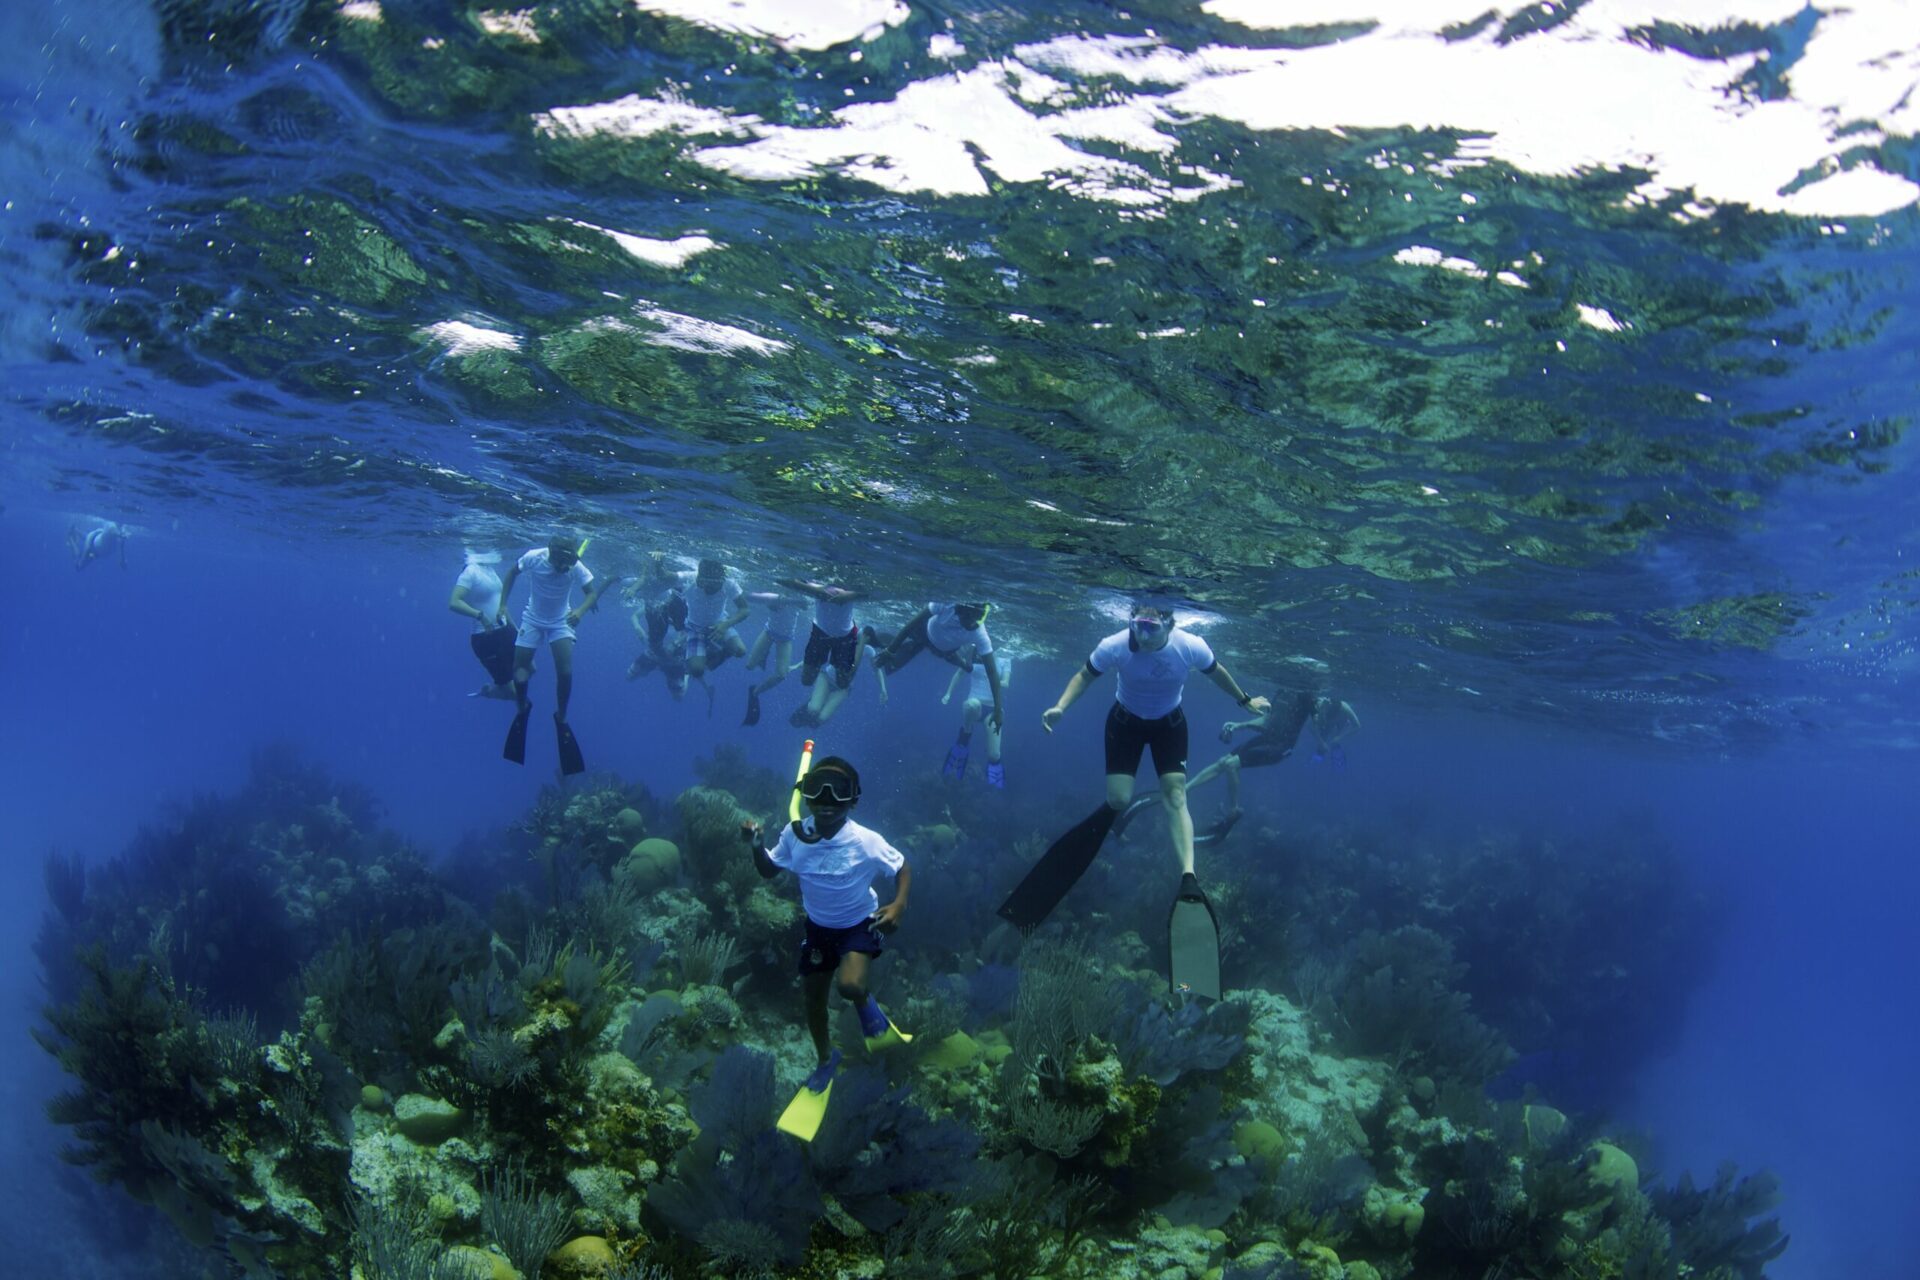 a group of kids in fins below the water learning to freedive